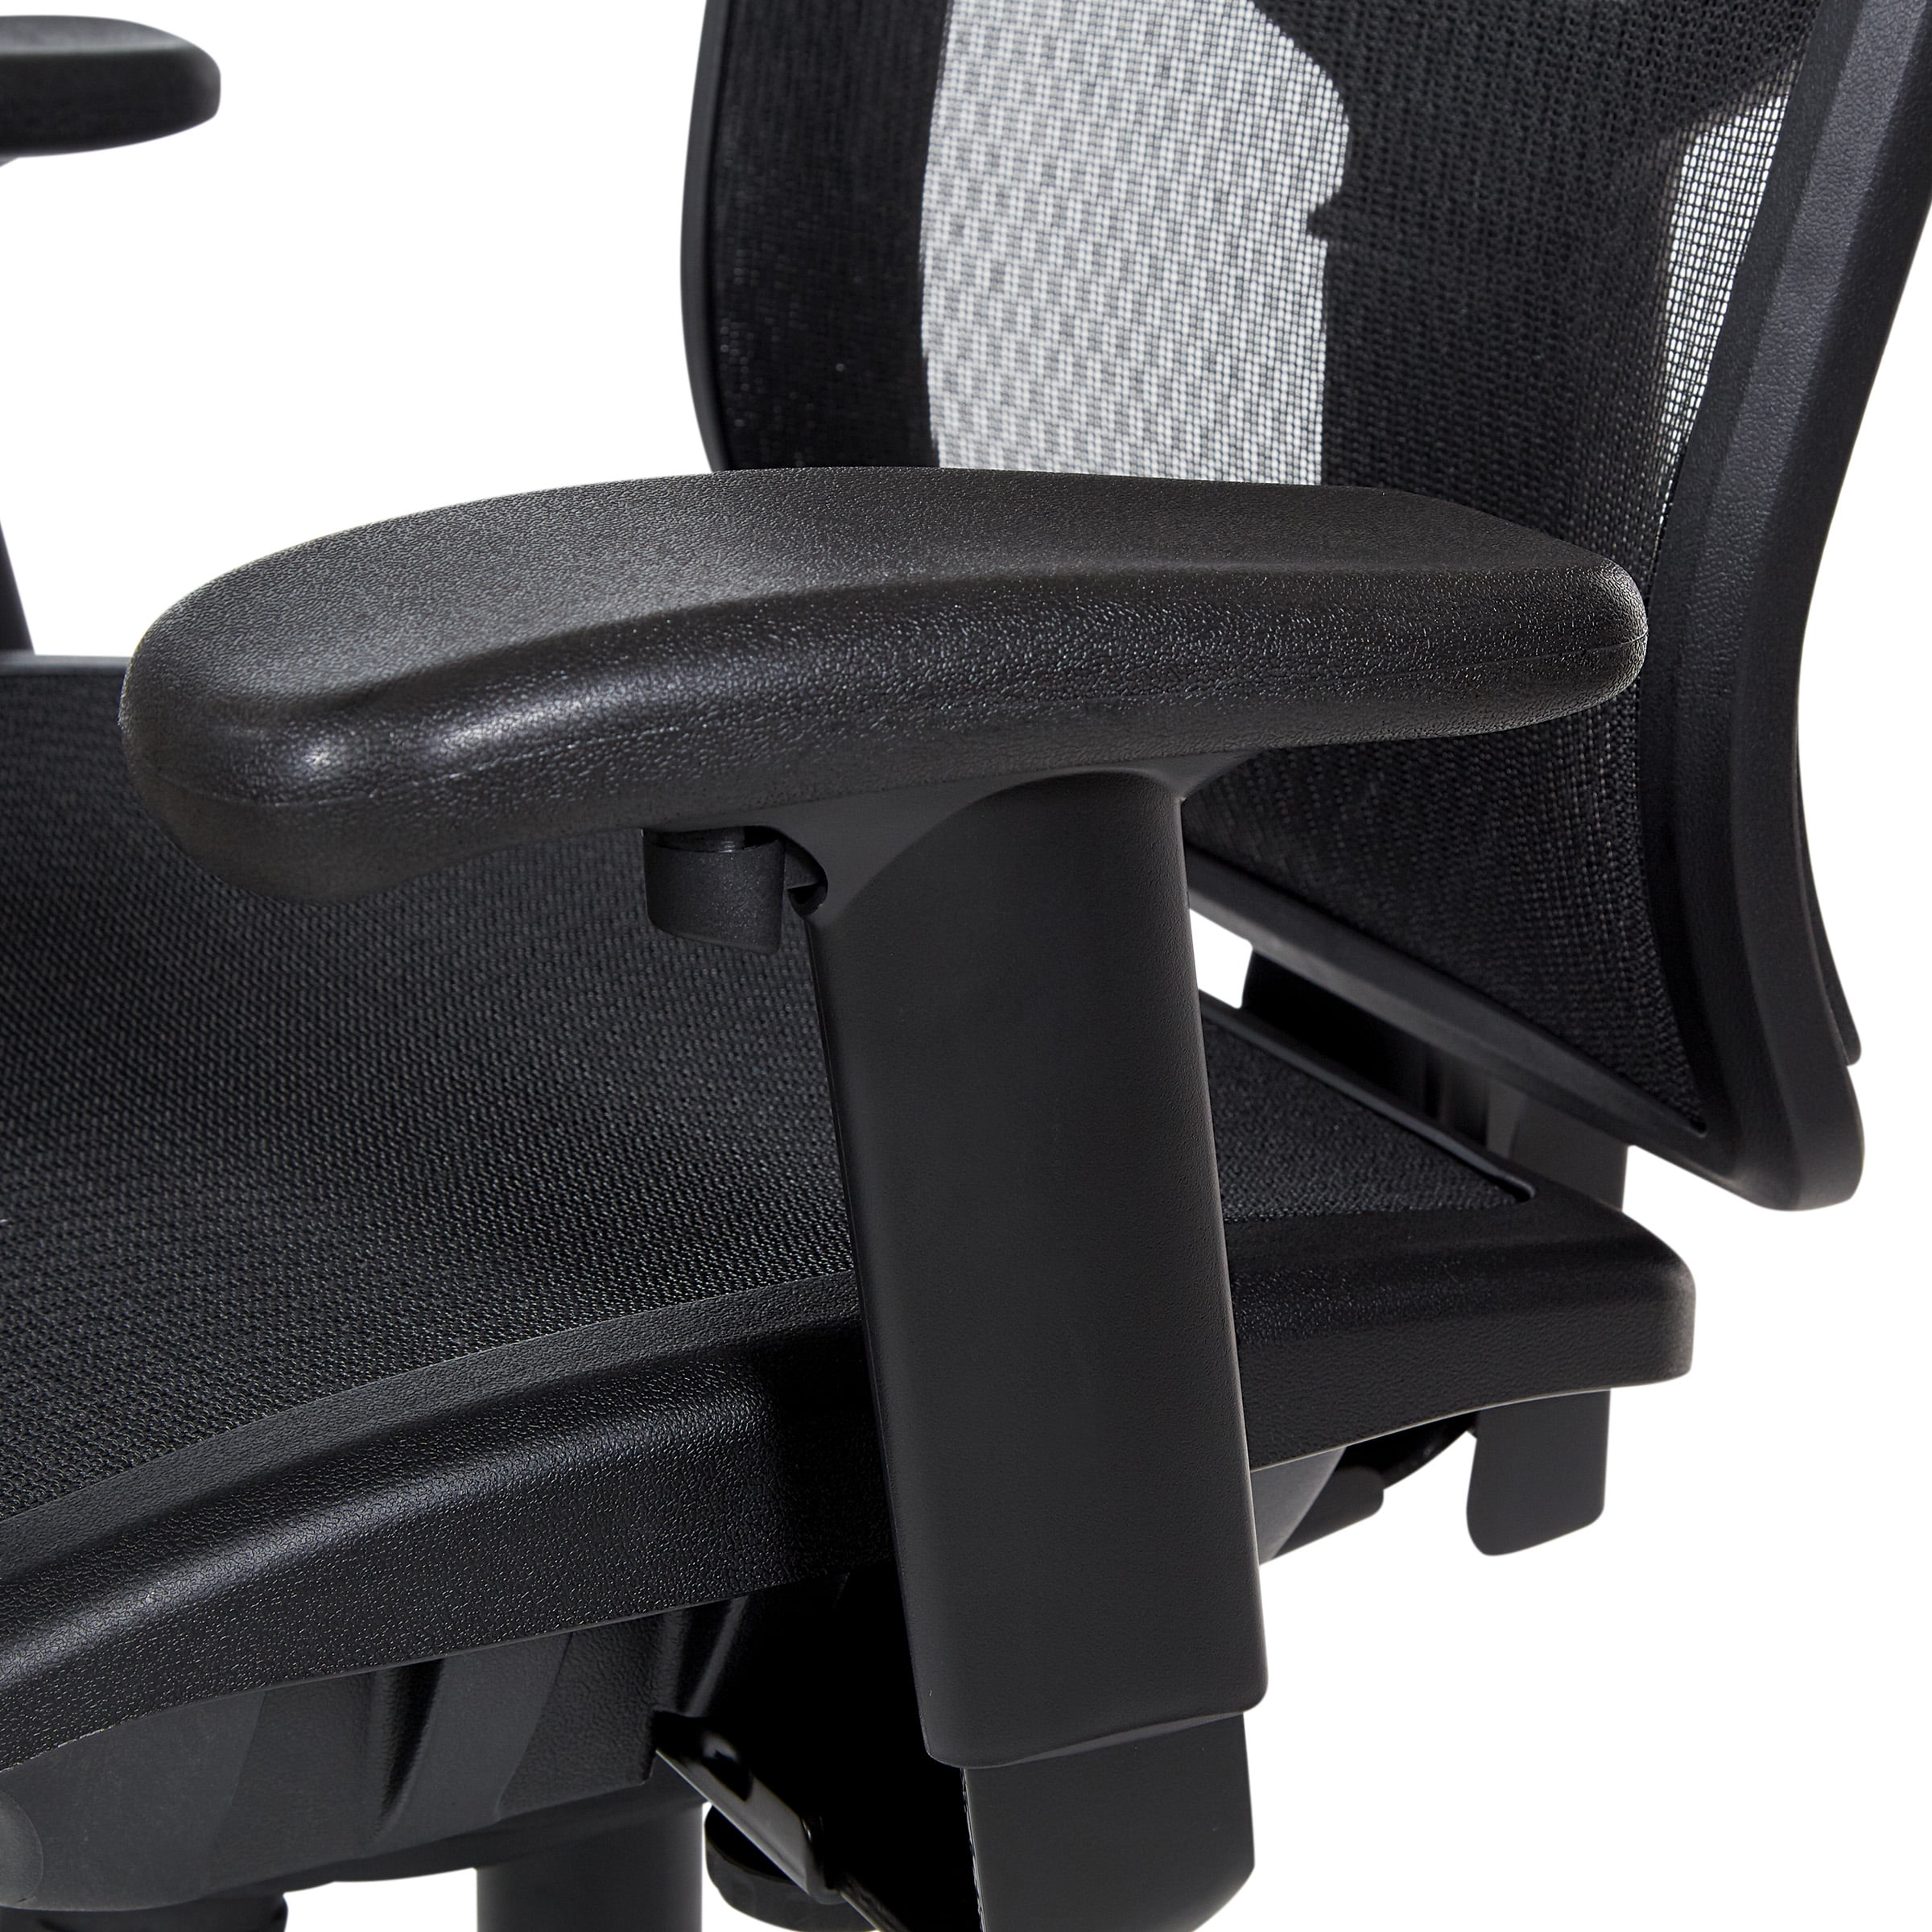 Office Star EM Series Bonded Leather Manager's Adjustable Office Desk Chair  with Thick Padded Seat and Built-in Lumbar Support, Black with Silver